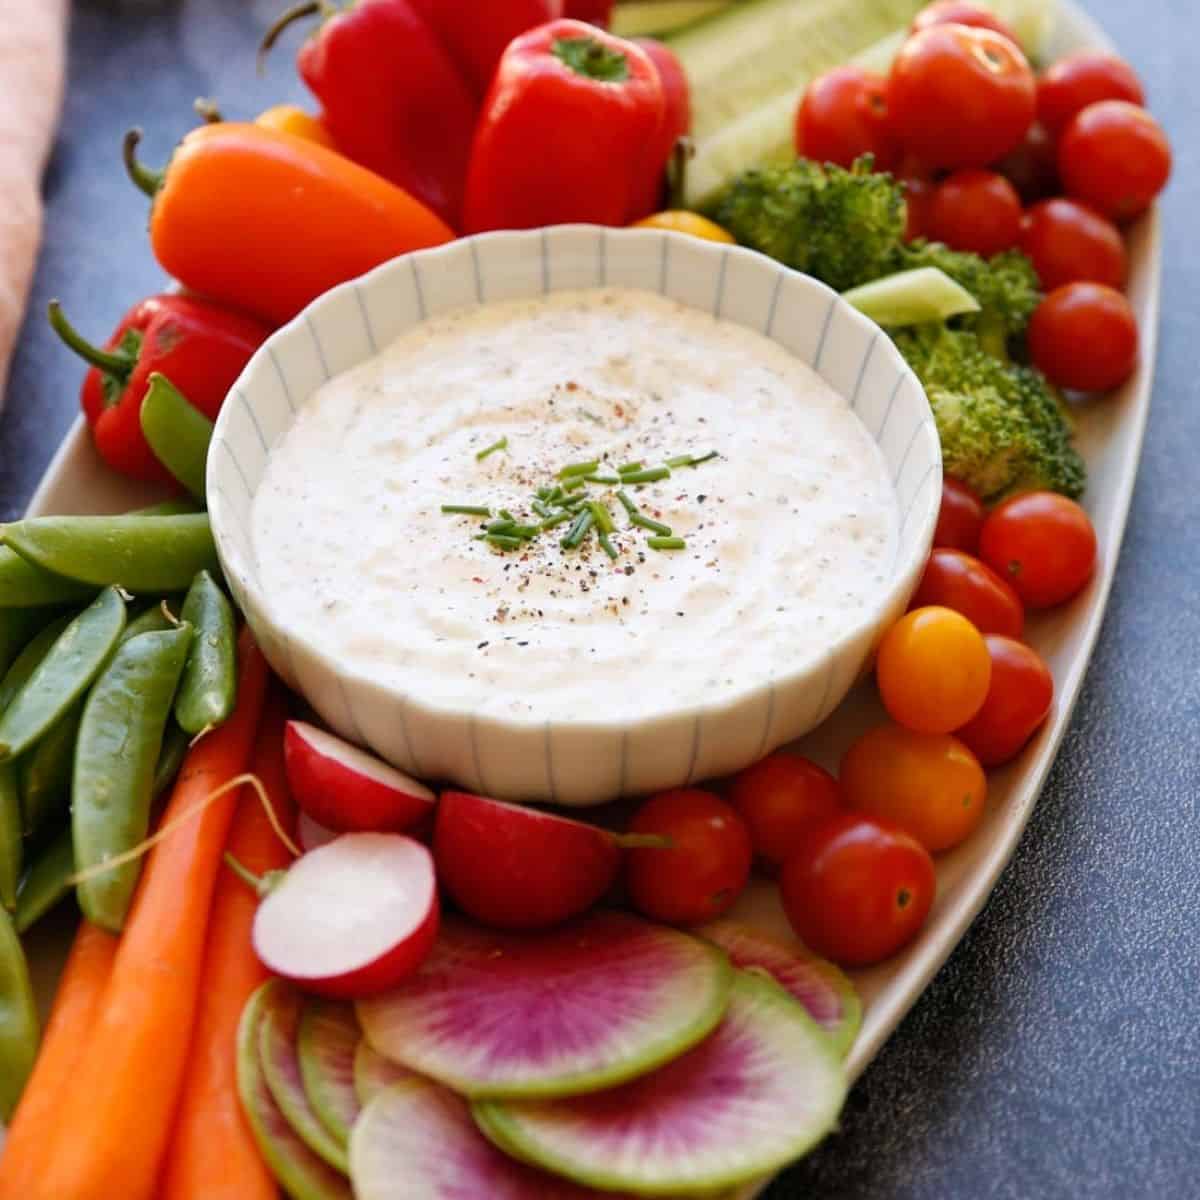 Parmesan Peppercorn Dressing in a bowl with vegetables